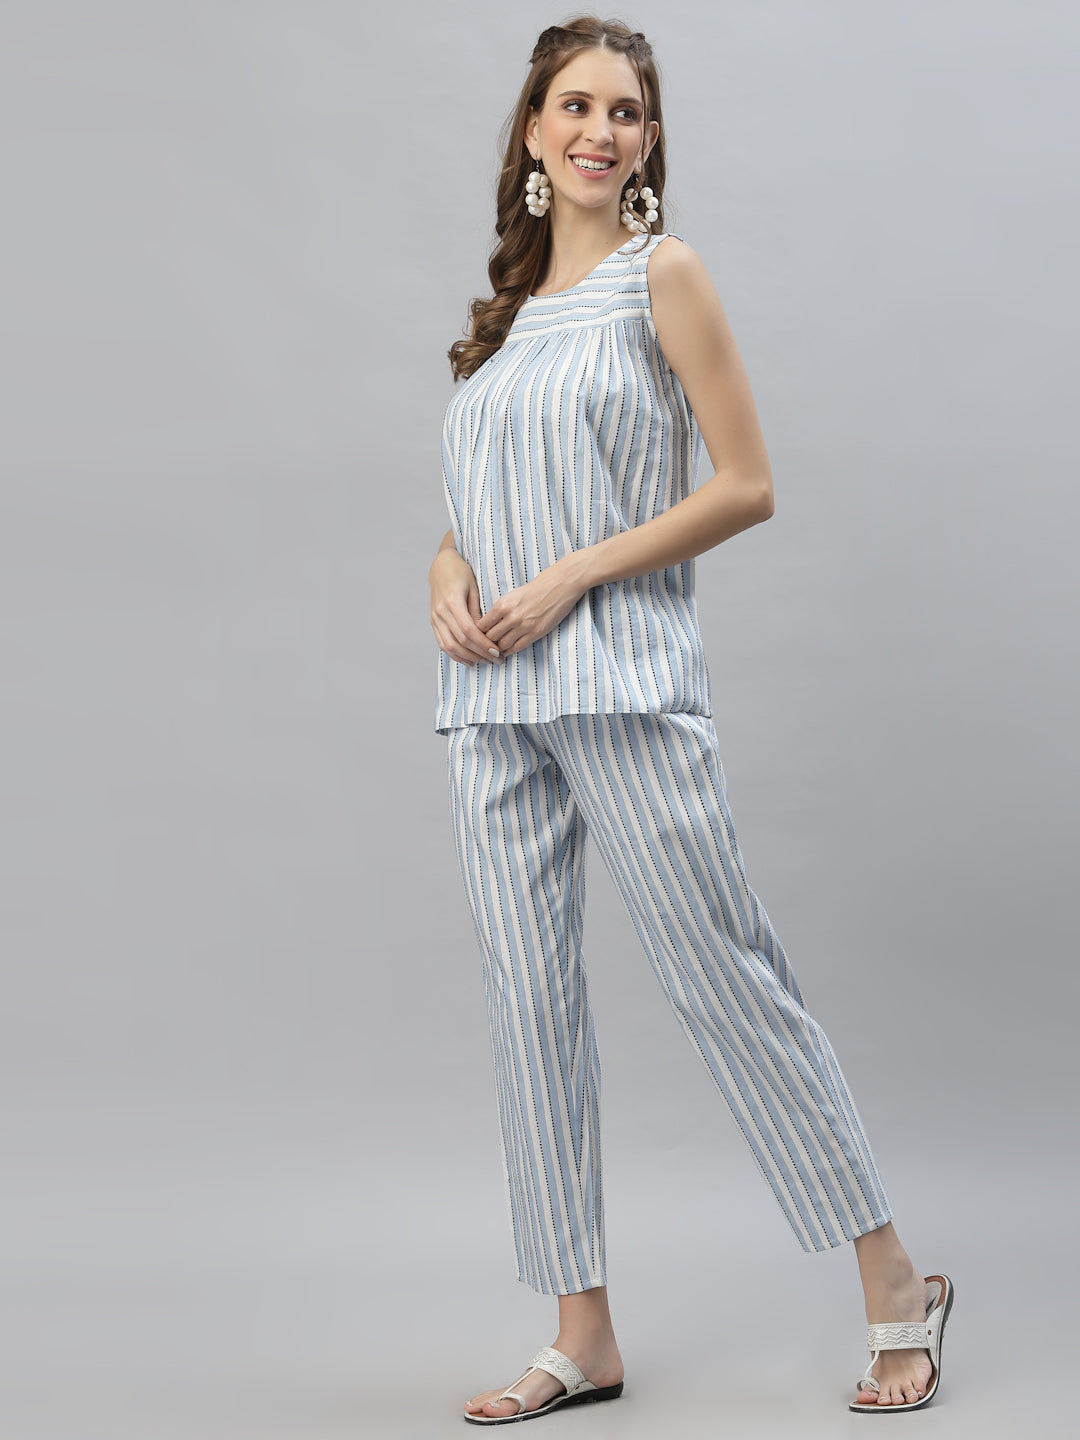 Self Woven Striped Cotton Blend Top and Pant Set